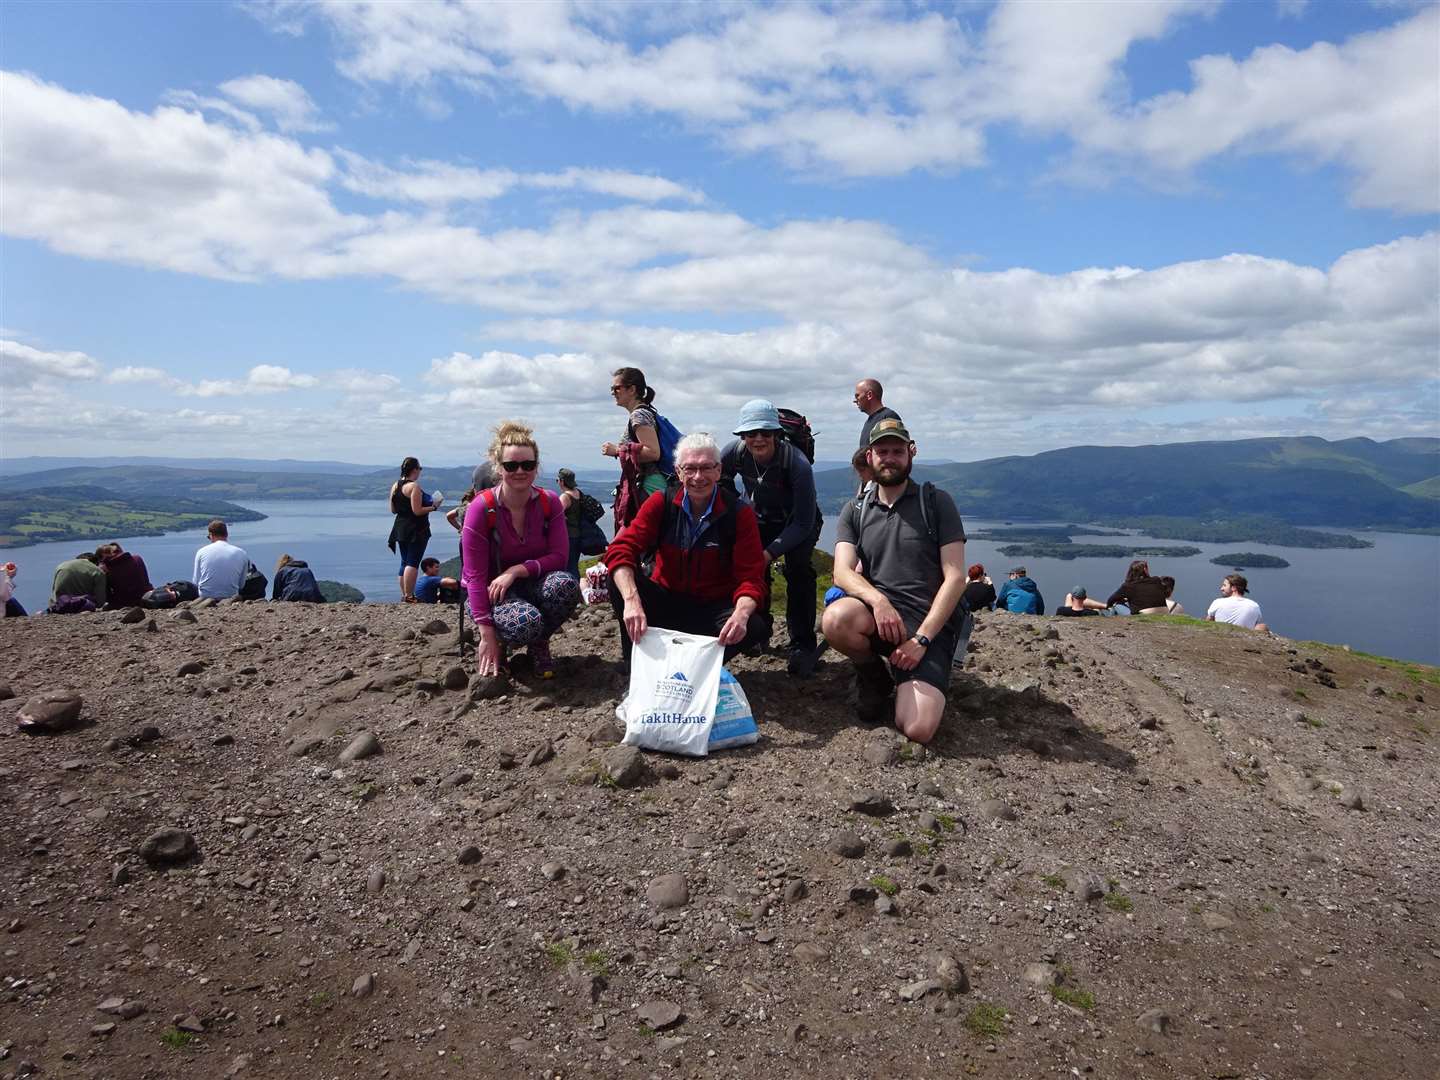 Mountaineering Scotland’s Access & Conservation Officer Davie Black (centre) during a 2019 litter pick on Conic Hill, Loch Lomond.